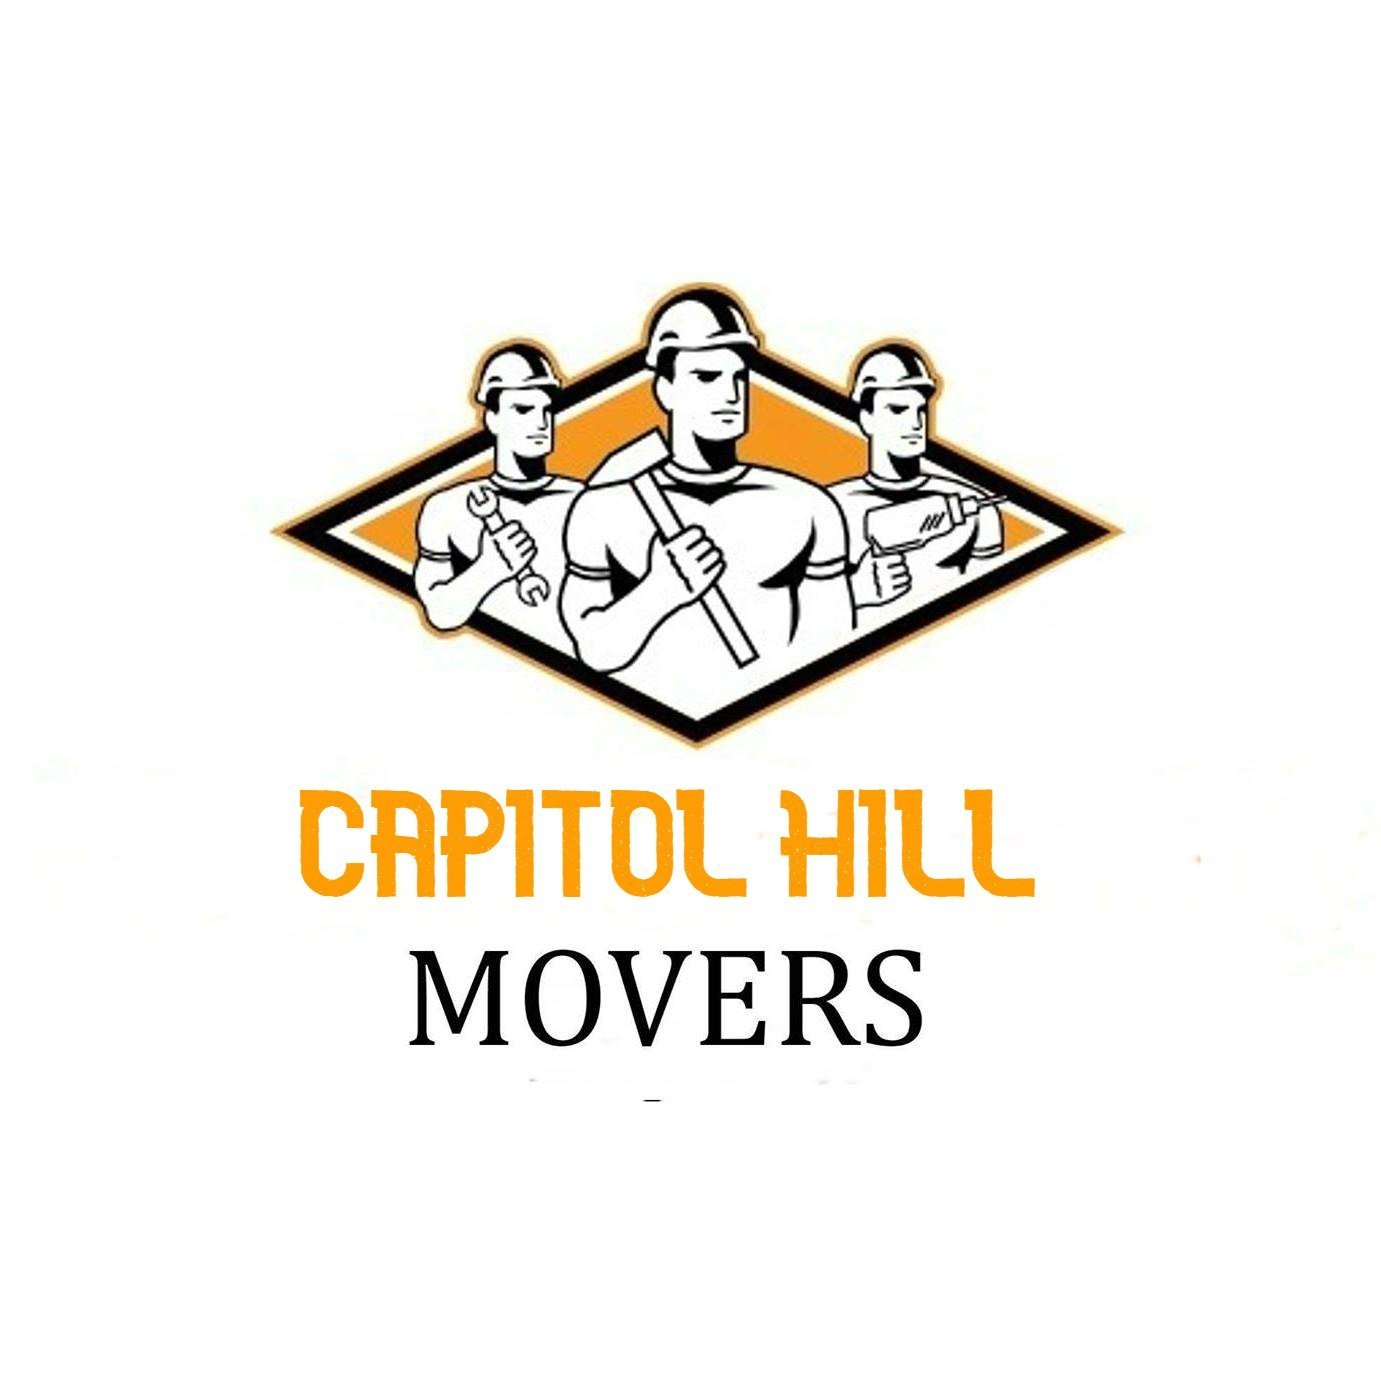 Maryland Pool Table Movers